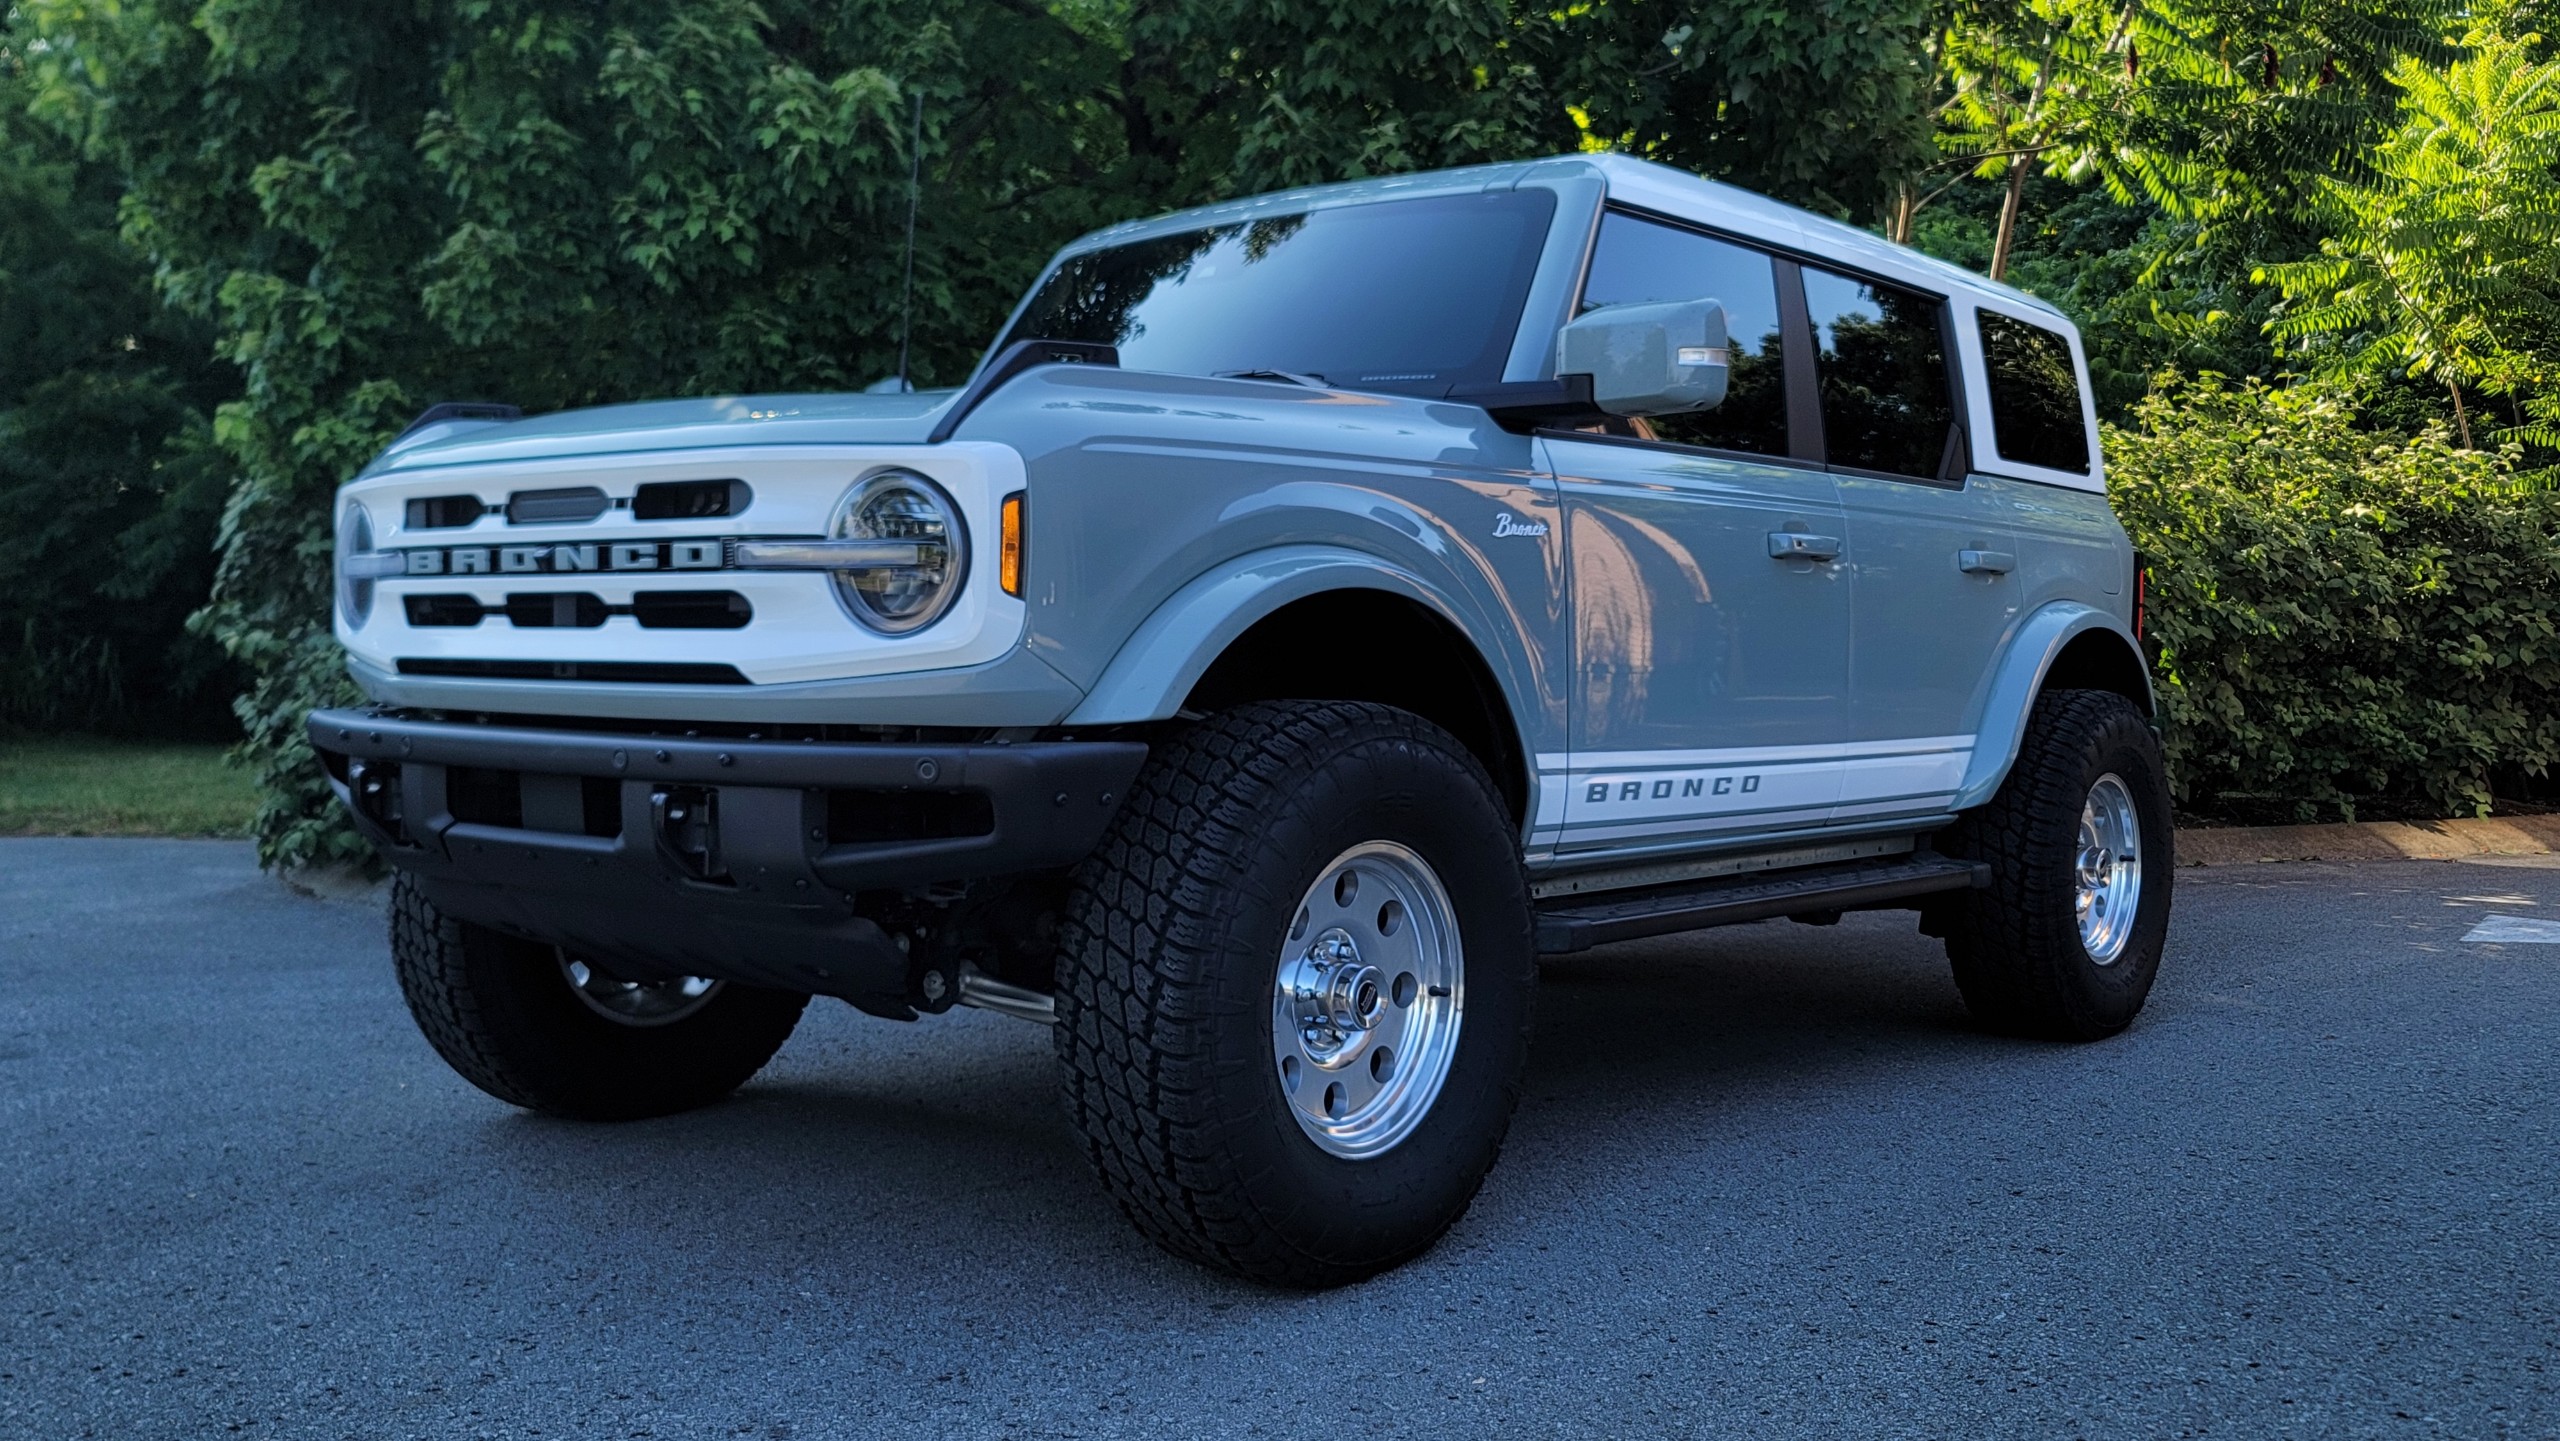 Ford Bronco 2023 Bronco Heritage Edition Revealed! 1,966 Heritage Limited Edition (Badlands) Units to be Produced. Unlimited (Big Bend) Heritage Editions 1660262370674